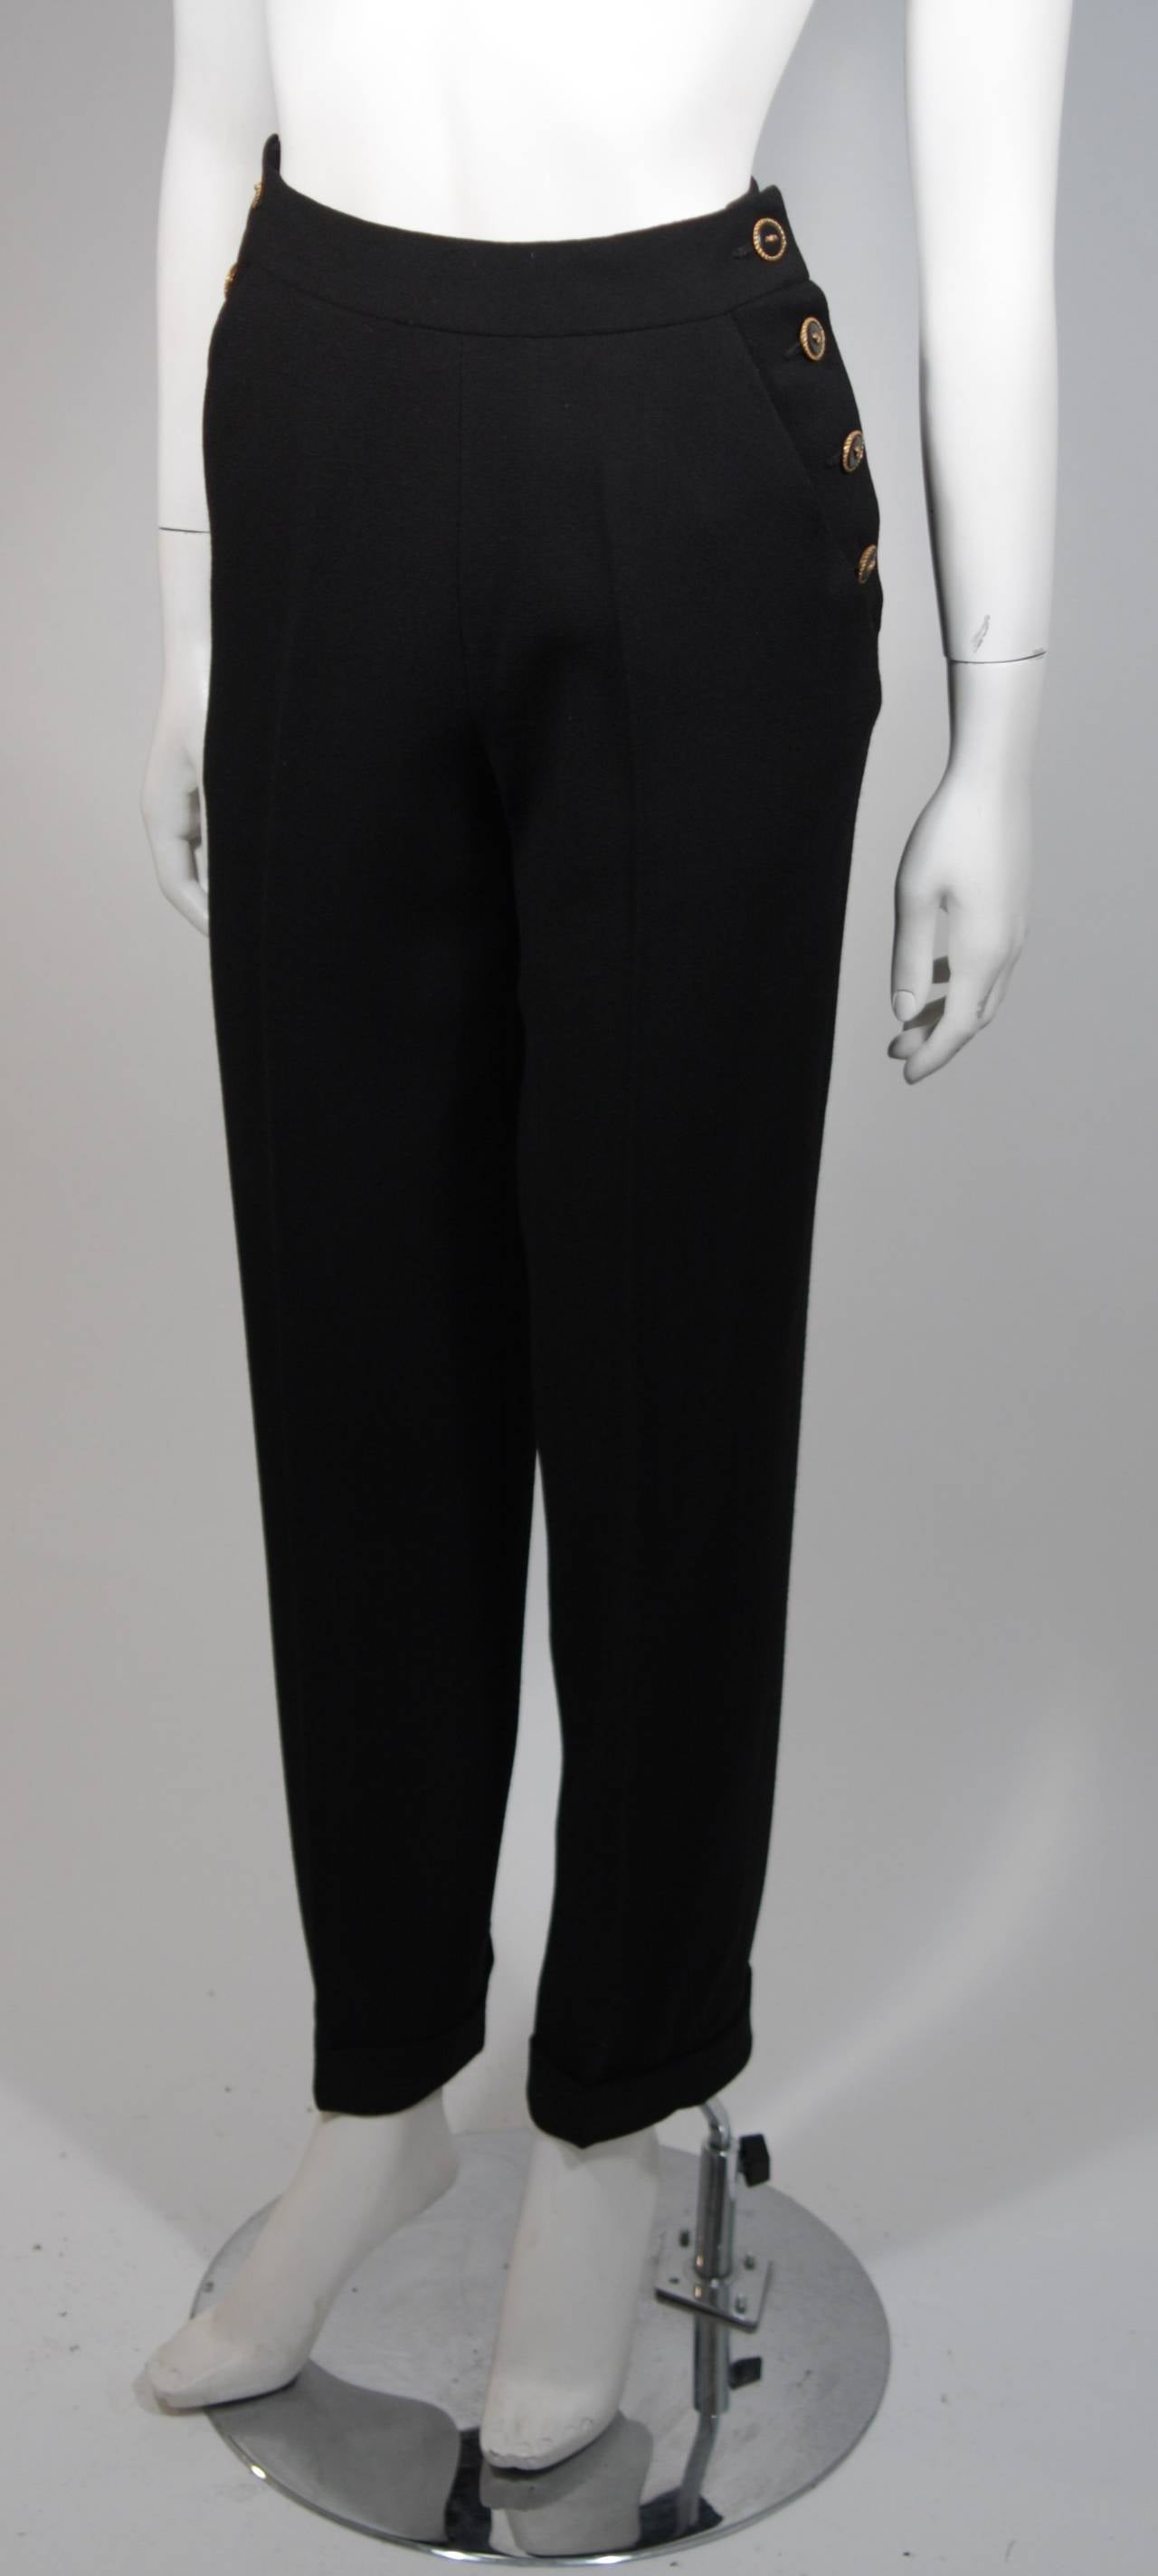 Chanel Haute Couture Black Wool Sailor Inspired Suit Size 2-4 EU 34-36 2